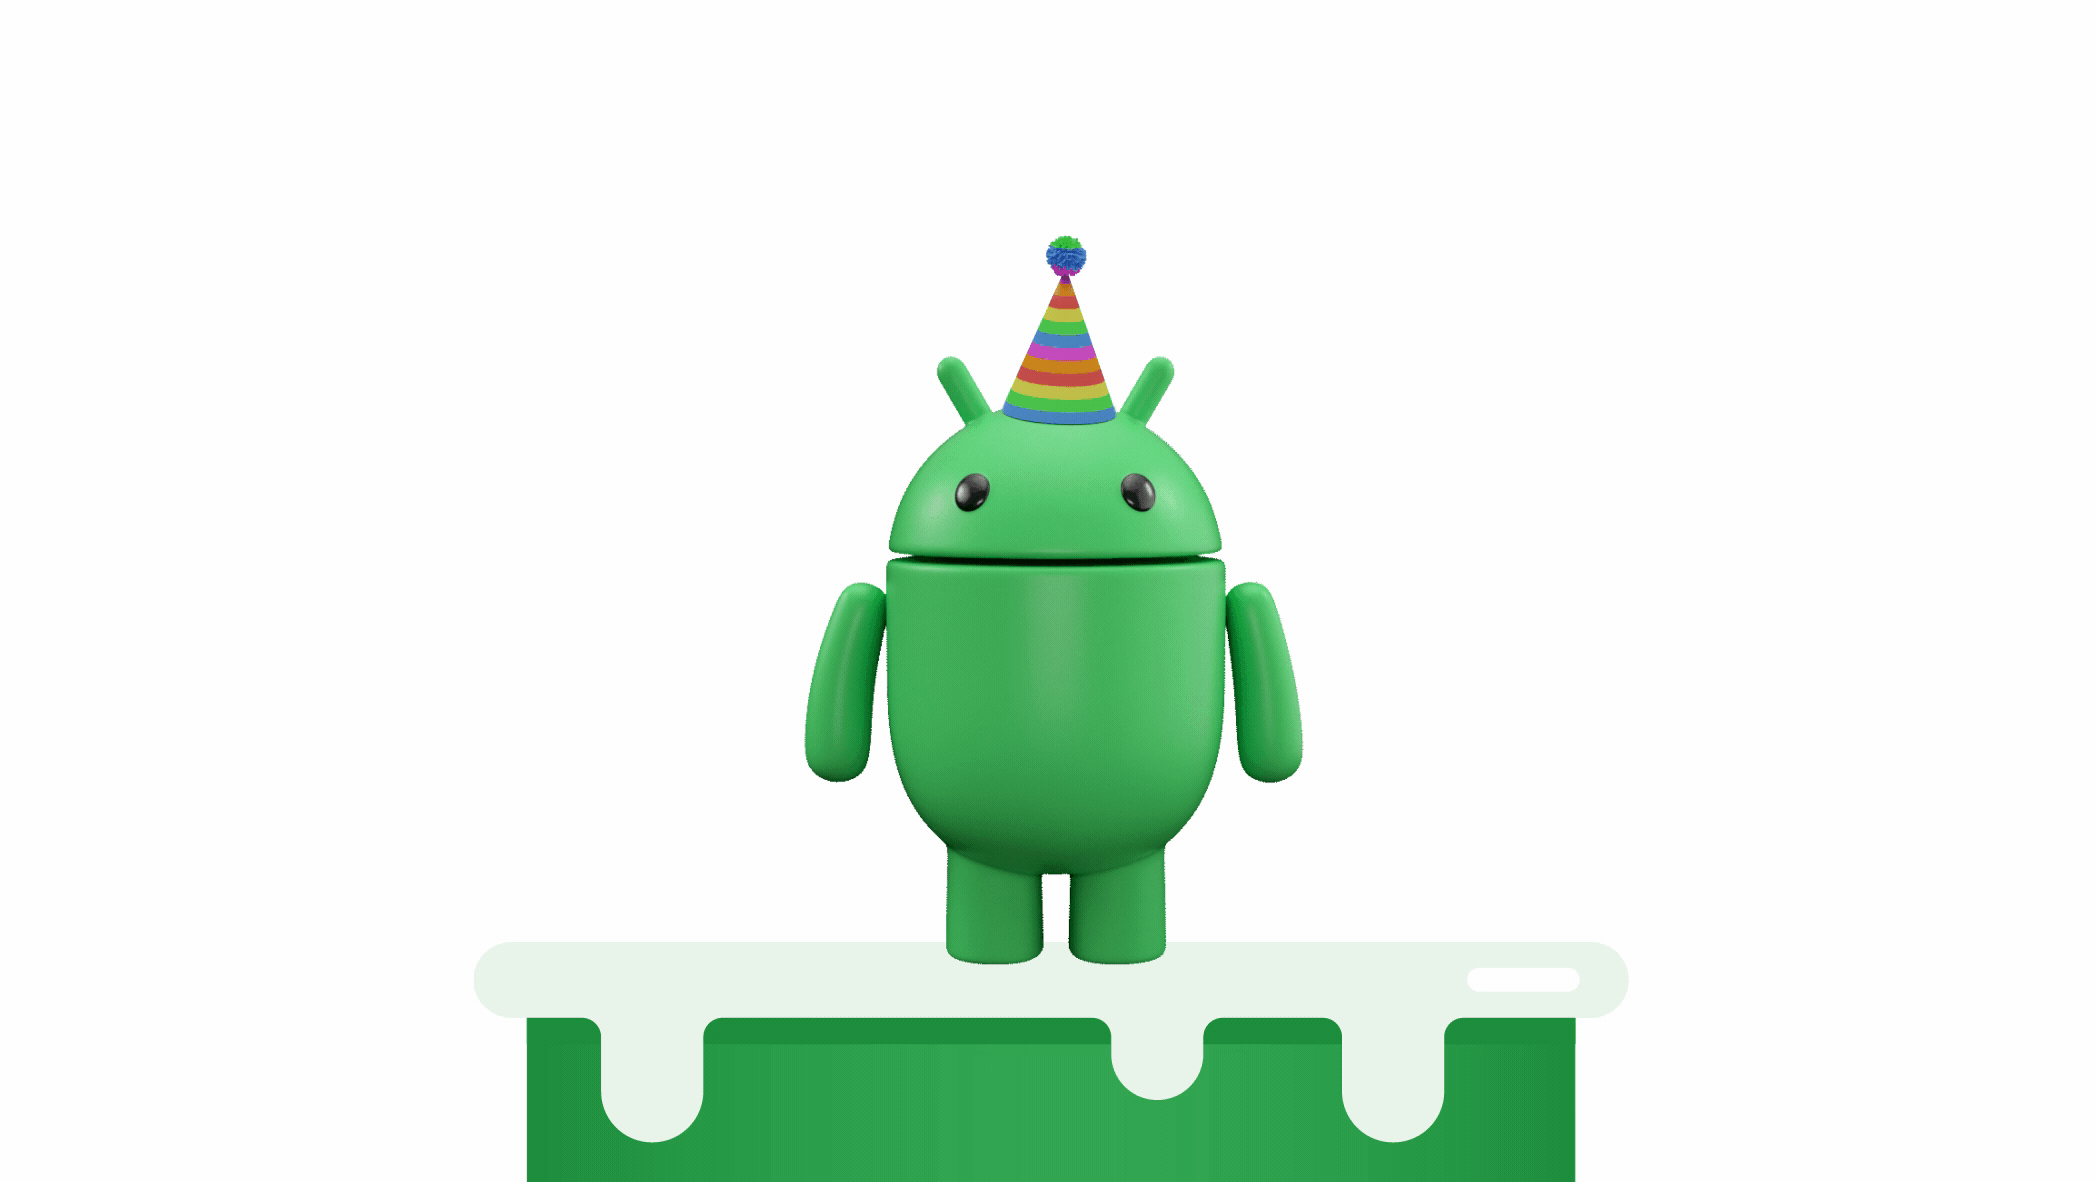 Green Android robot standing on top of a cake with a rainbow birthday hat, followed by a confetti explosion in the background